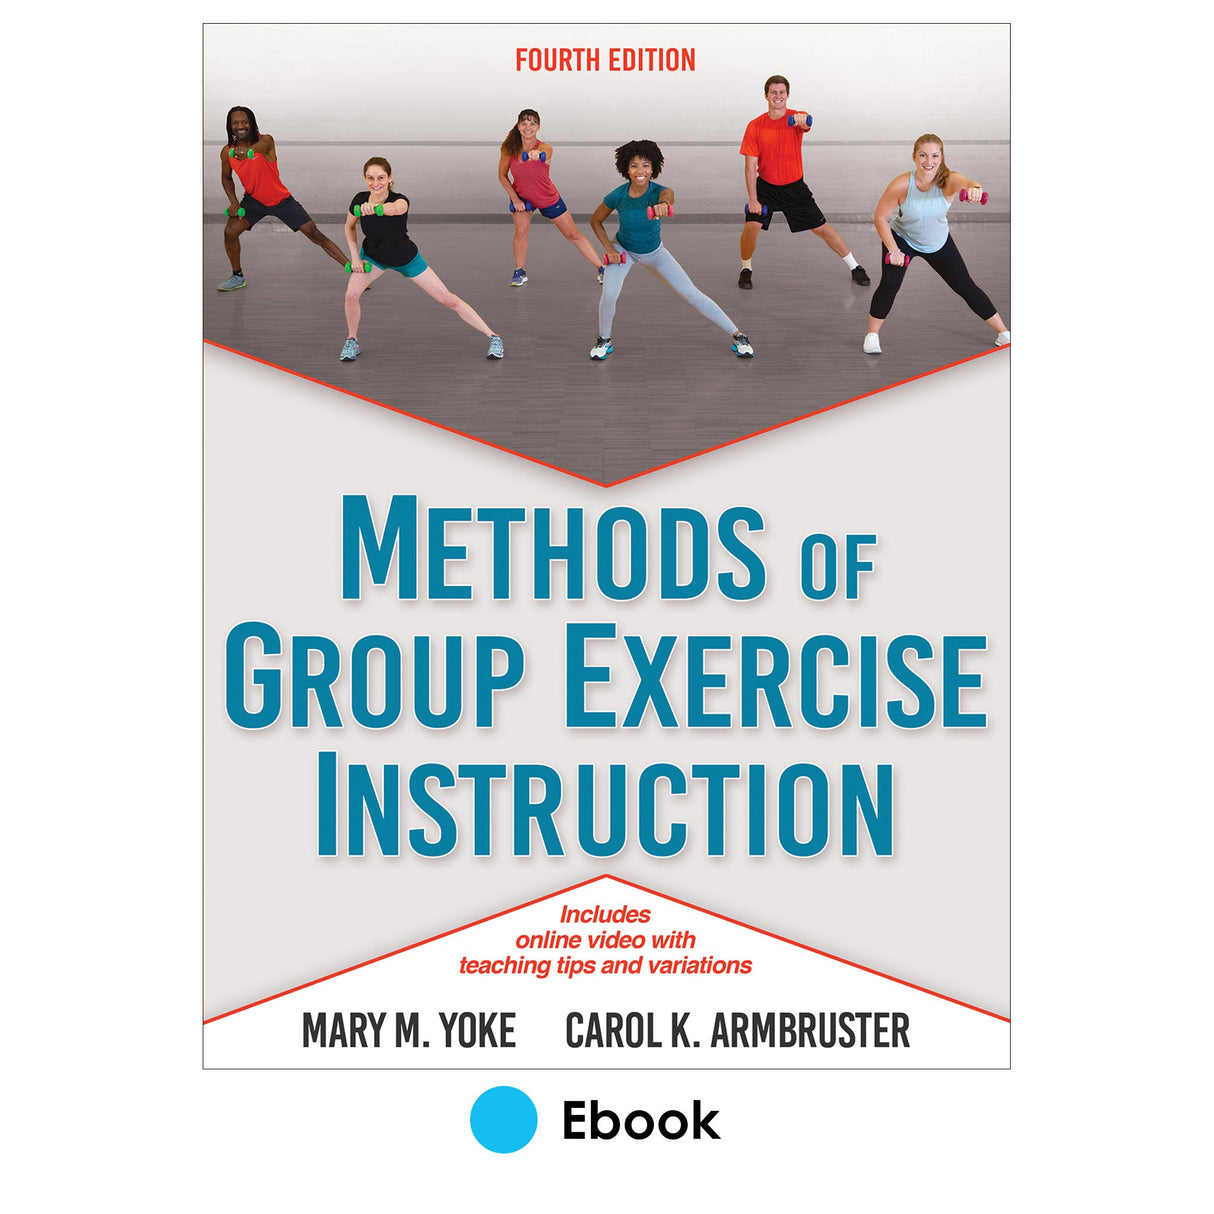 Methods of Group Exercise Instruction 4th Edition epub With Online Video